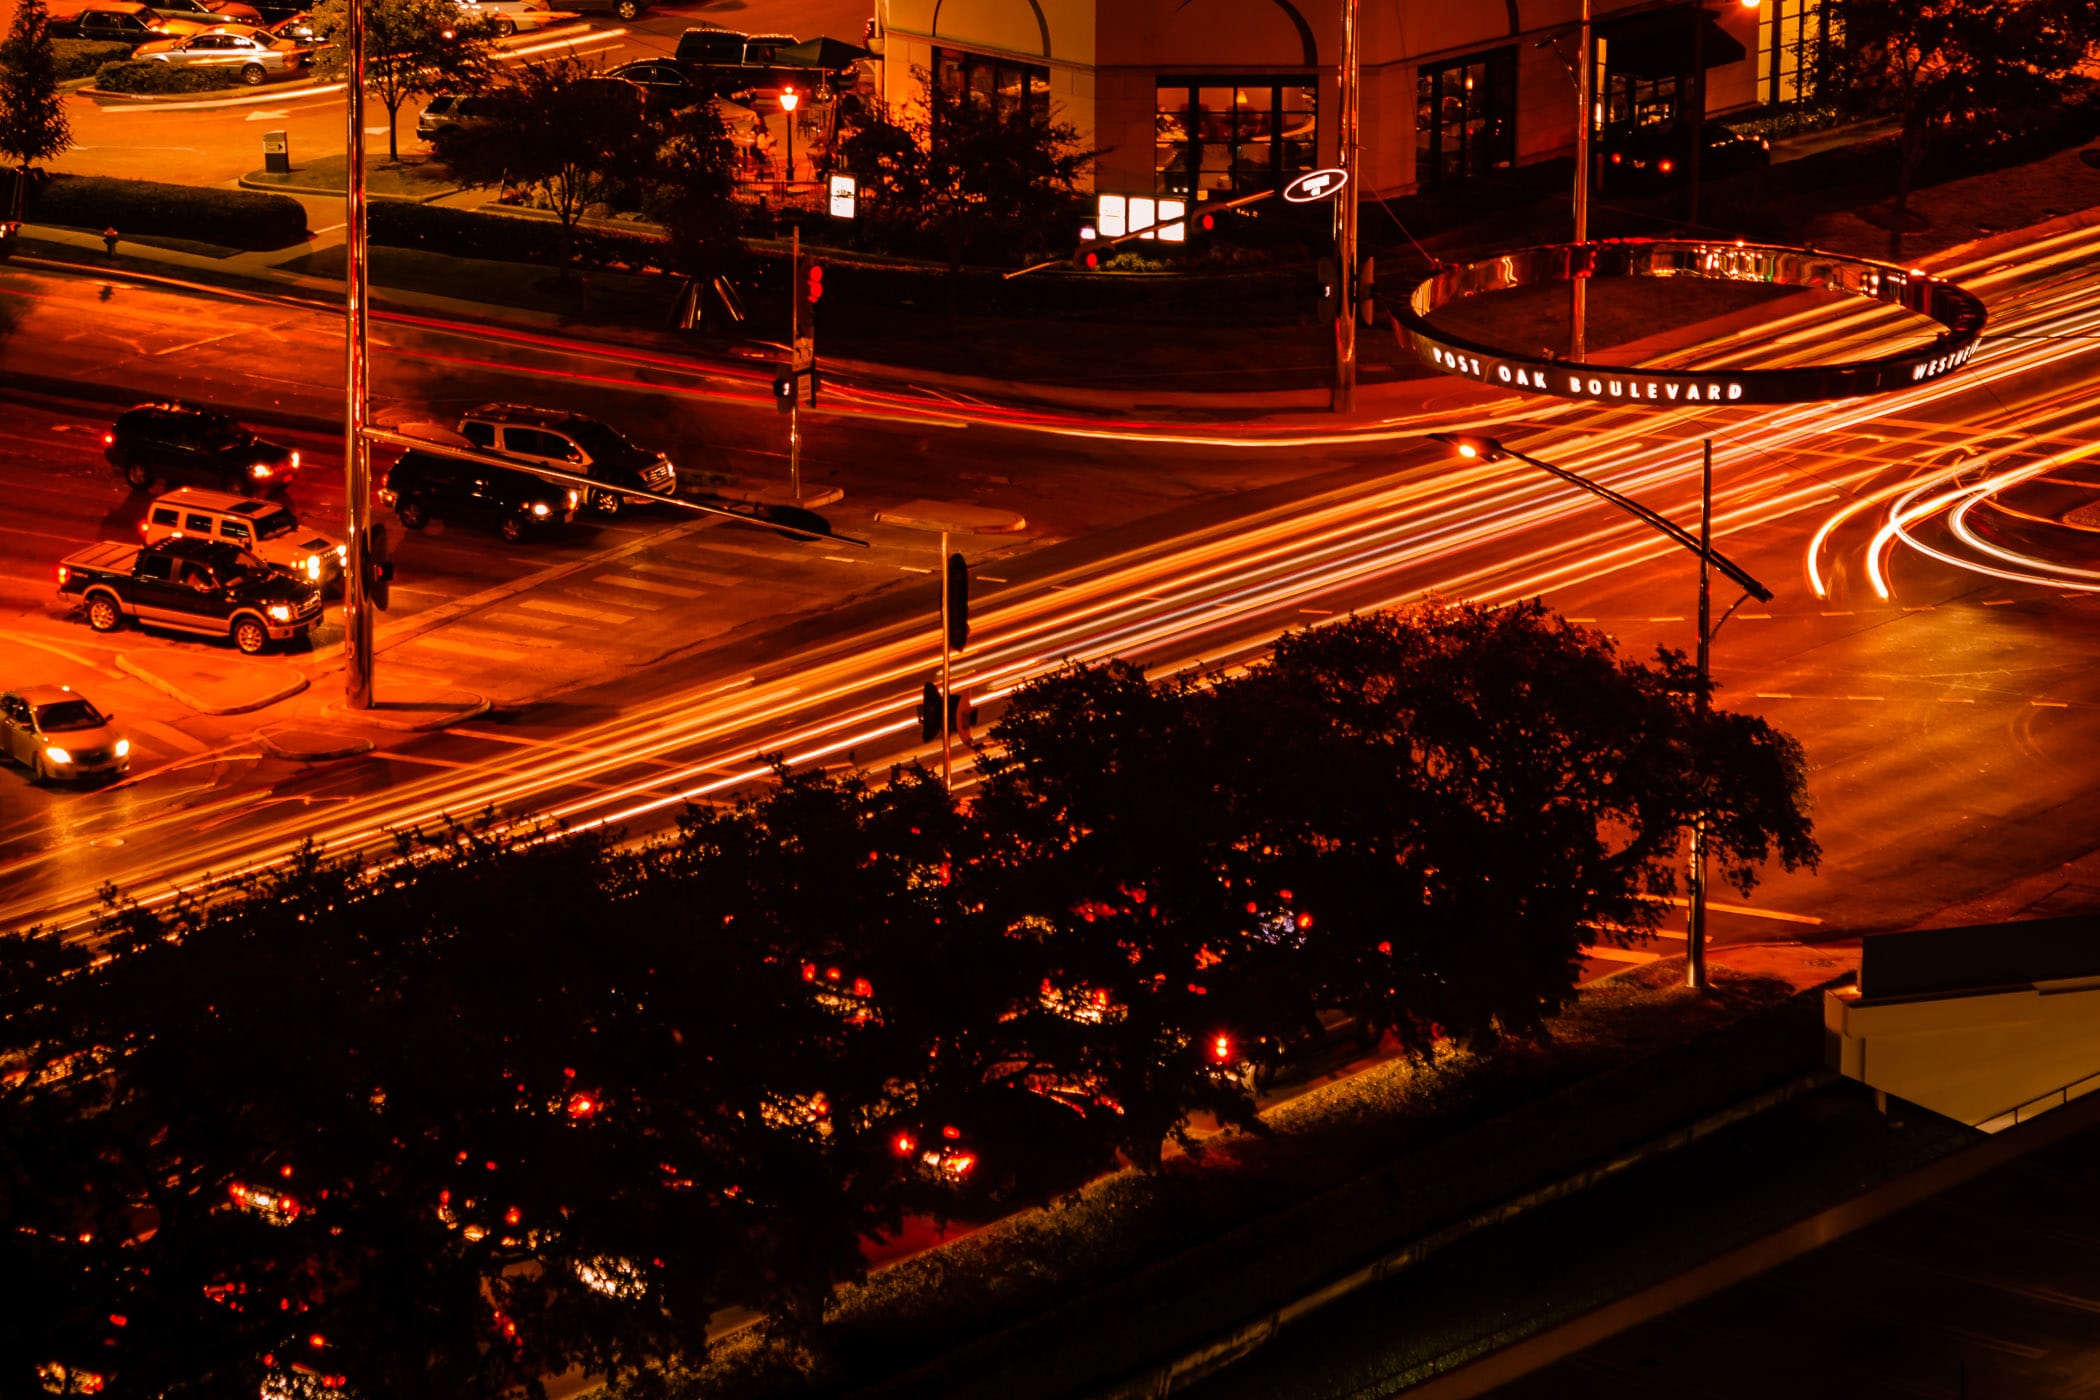 A long exposure shot of the busy Houston intersection of Post Oak and Westheimer.